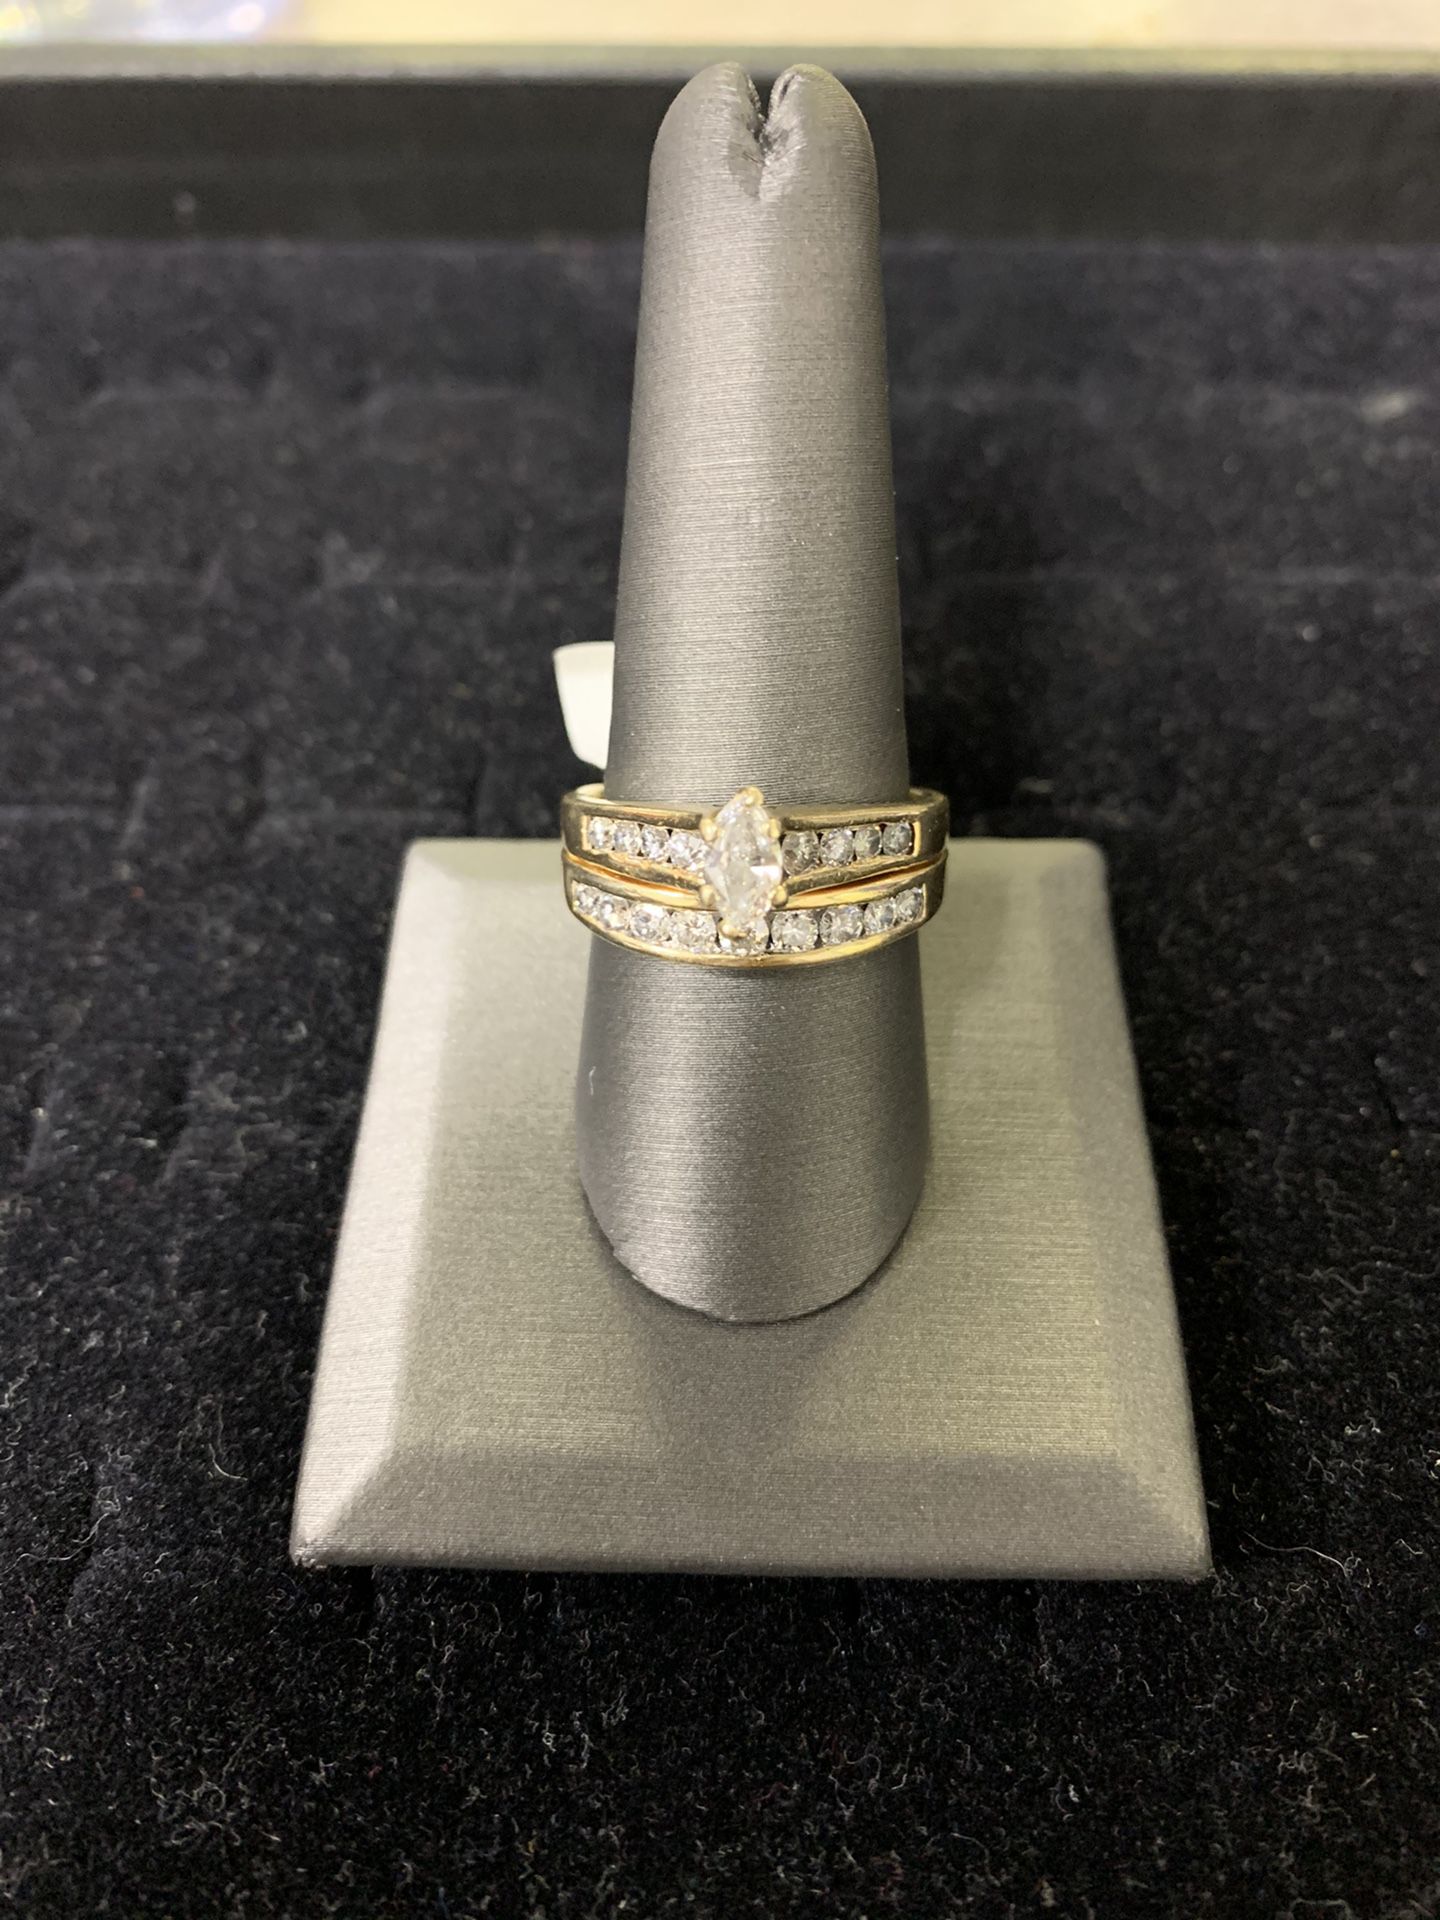 Woman’s engagement ring and band set. NO LOWBALLERS NO TRADES IN-STORE PICK-UP ONLY